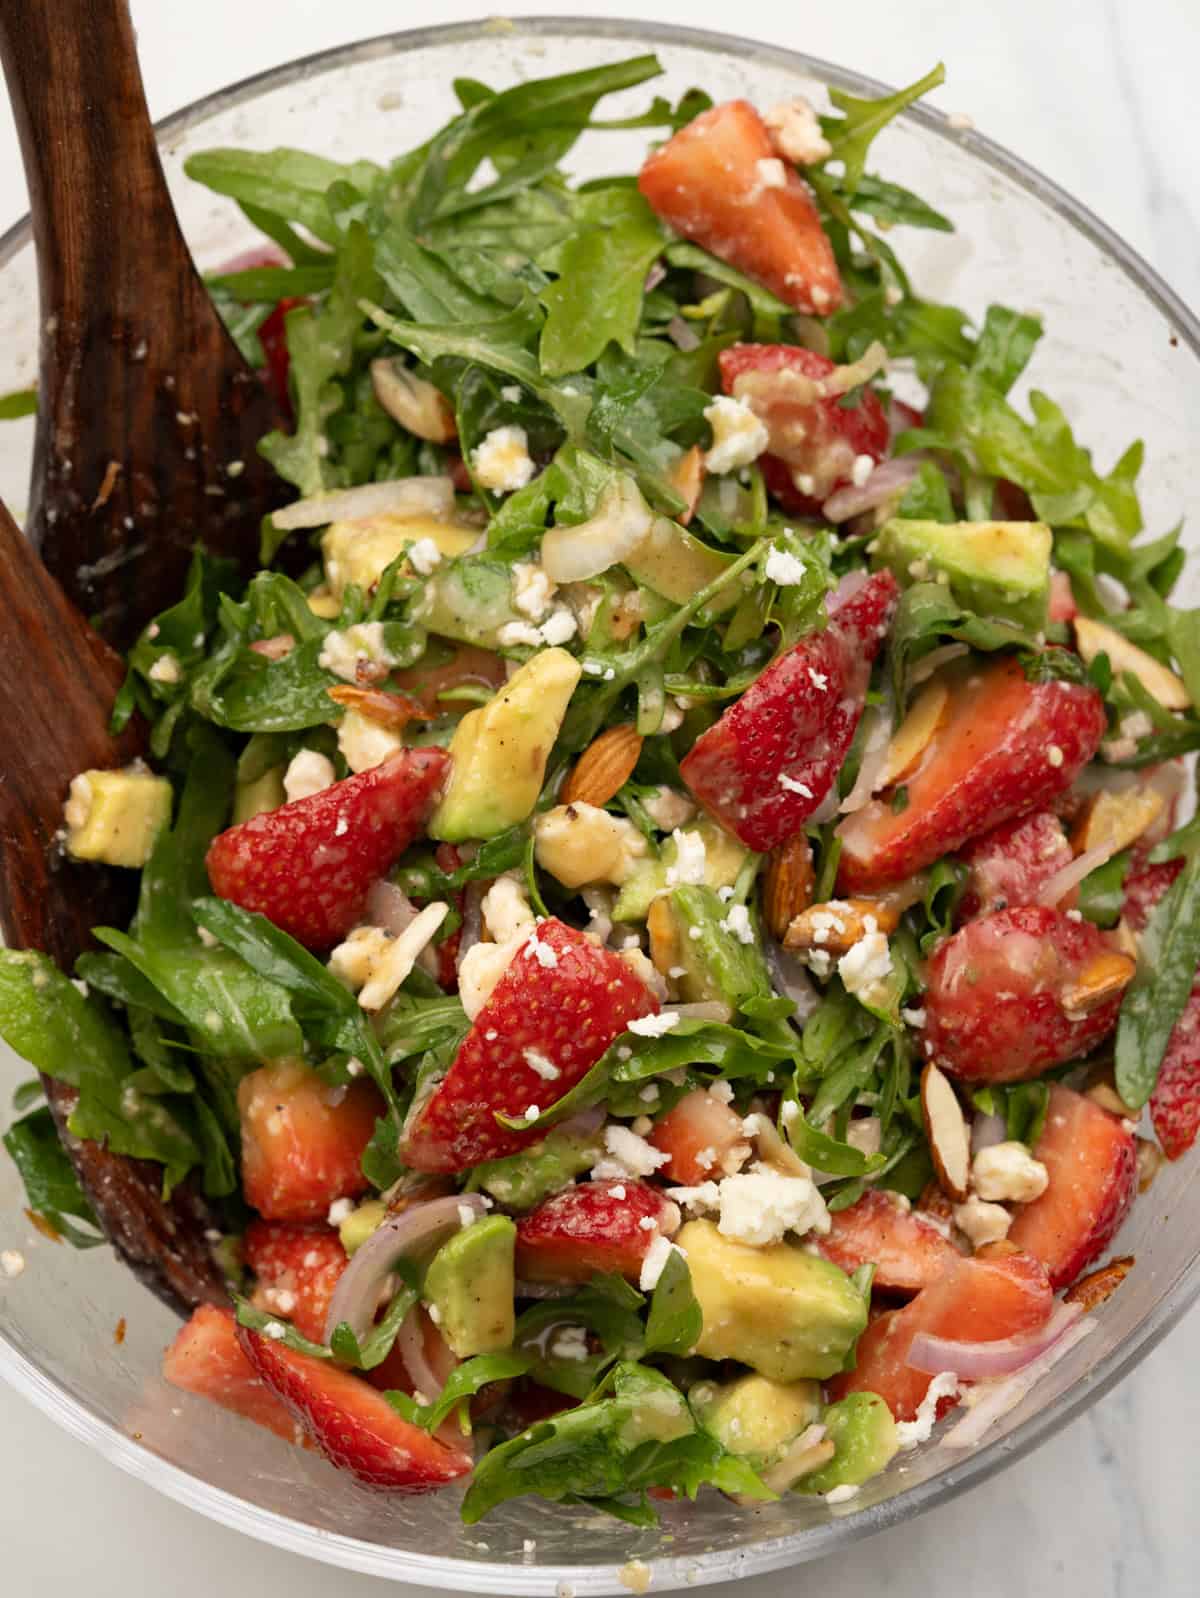 Strawberry salad with maple-dijon dressing, topped with toasted almonds and crumbled feta.